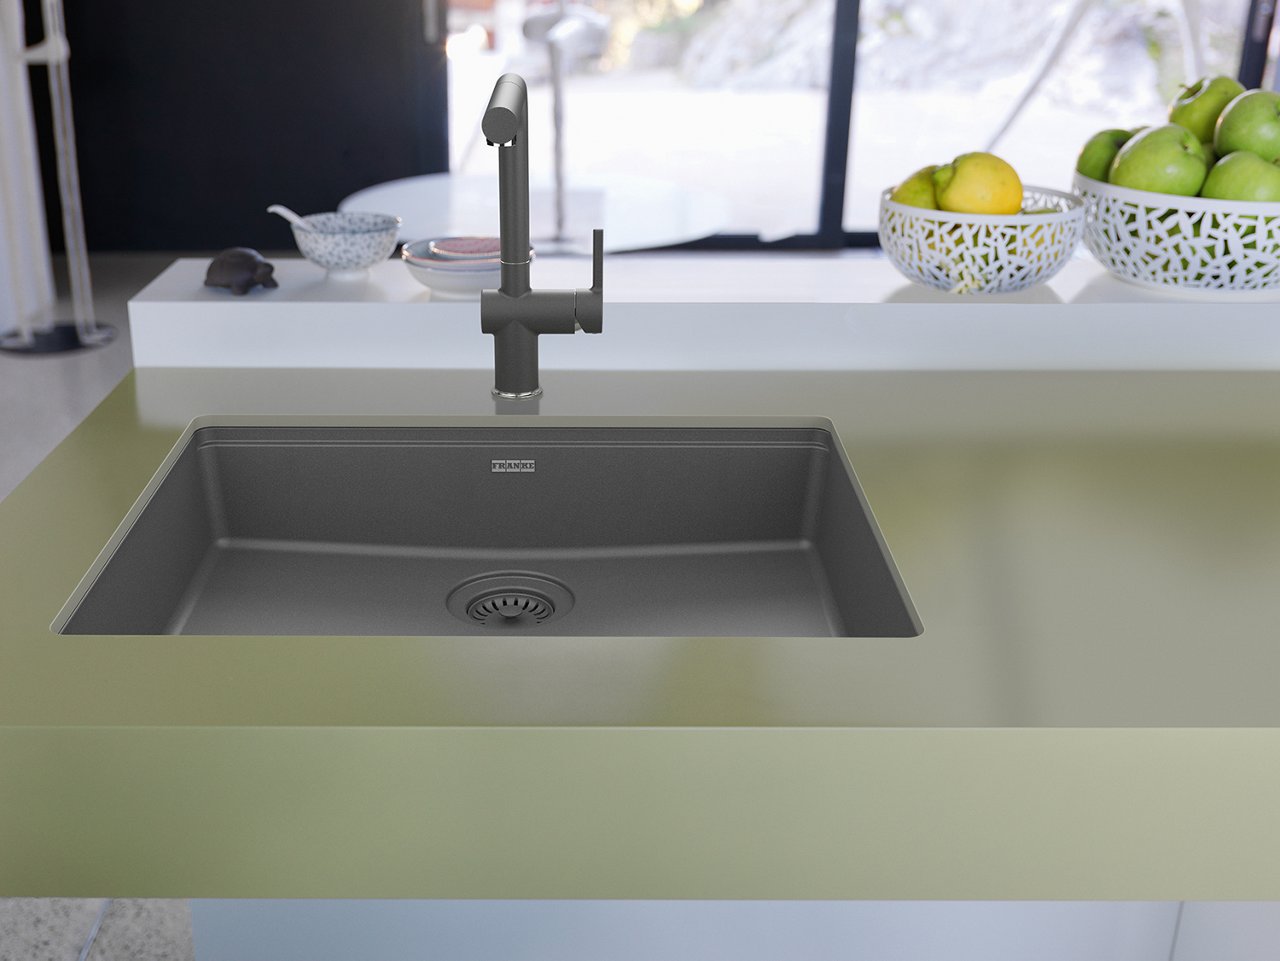 Armonia AMX120 double bowl stainless steel sink